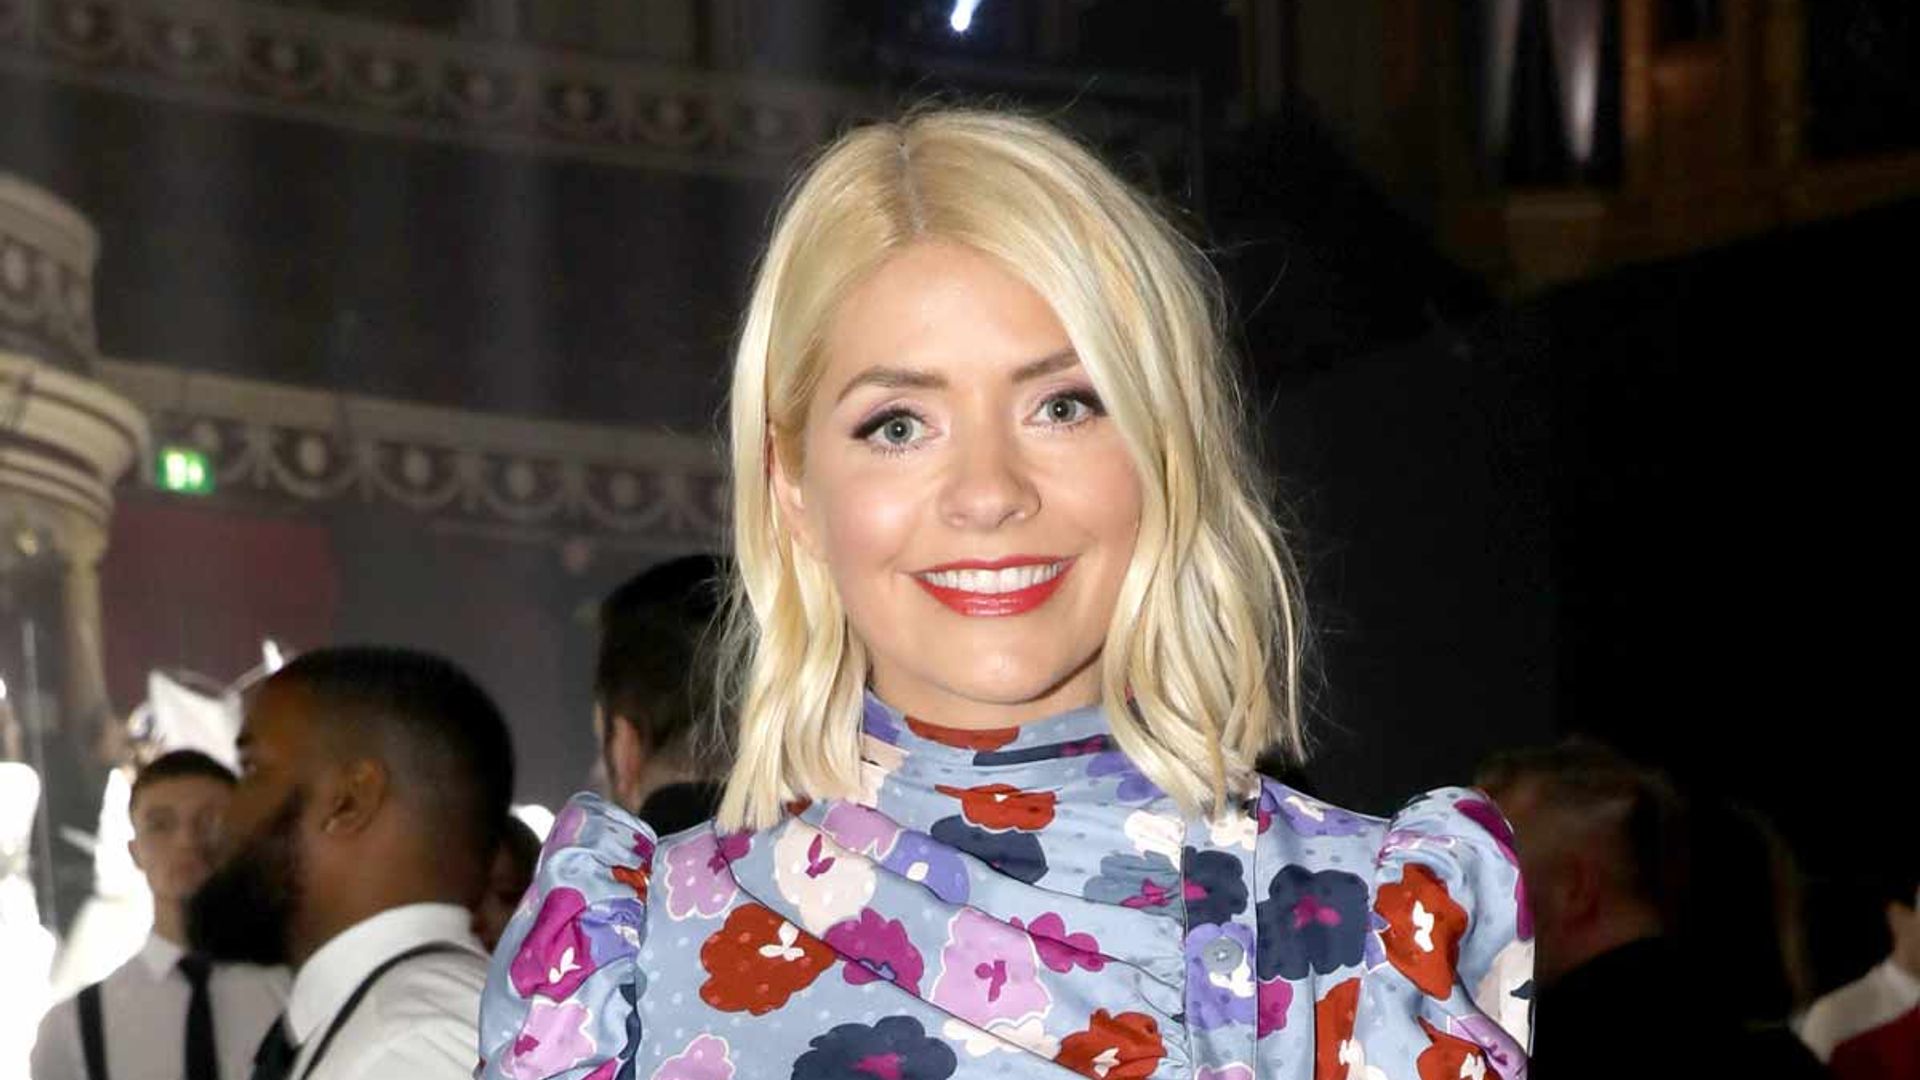 Holly Willoughby wows in a summery Kate Spade dress at the 2019 Fashion Awards